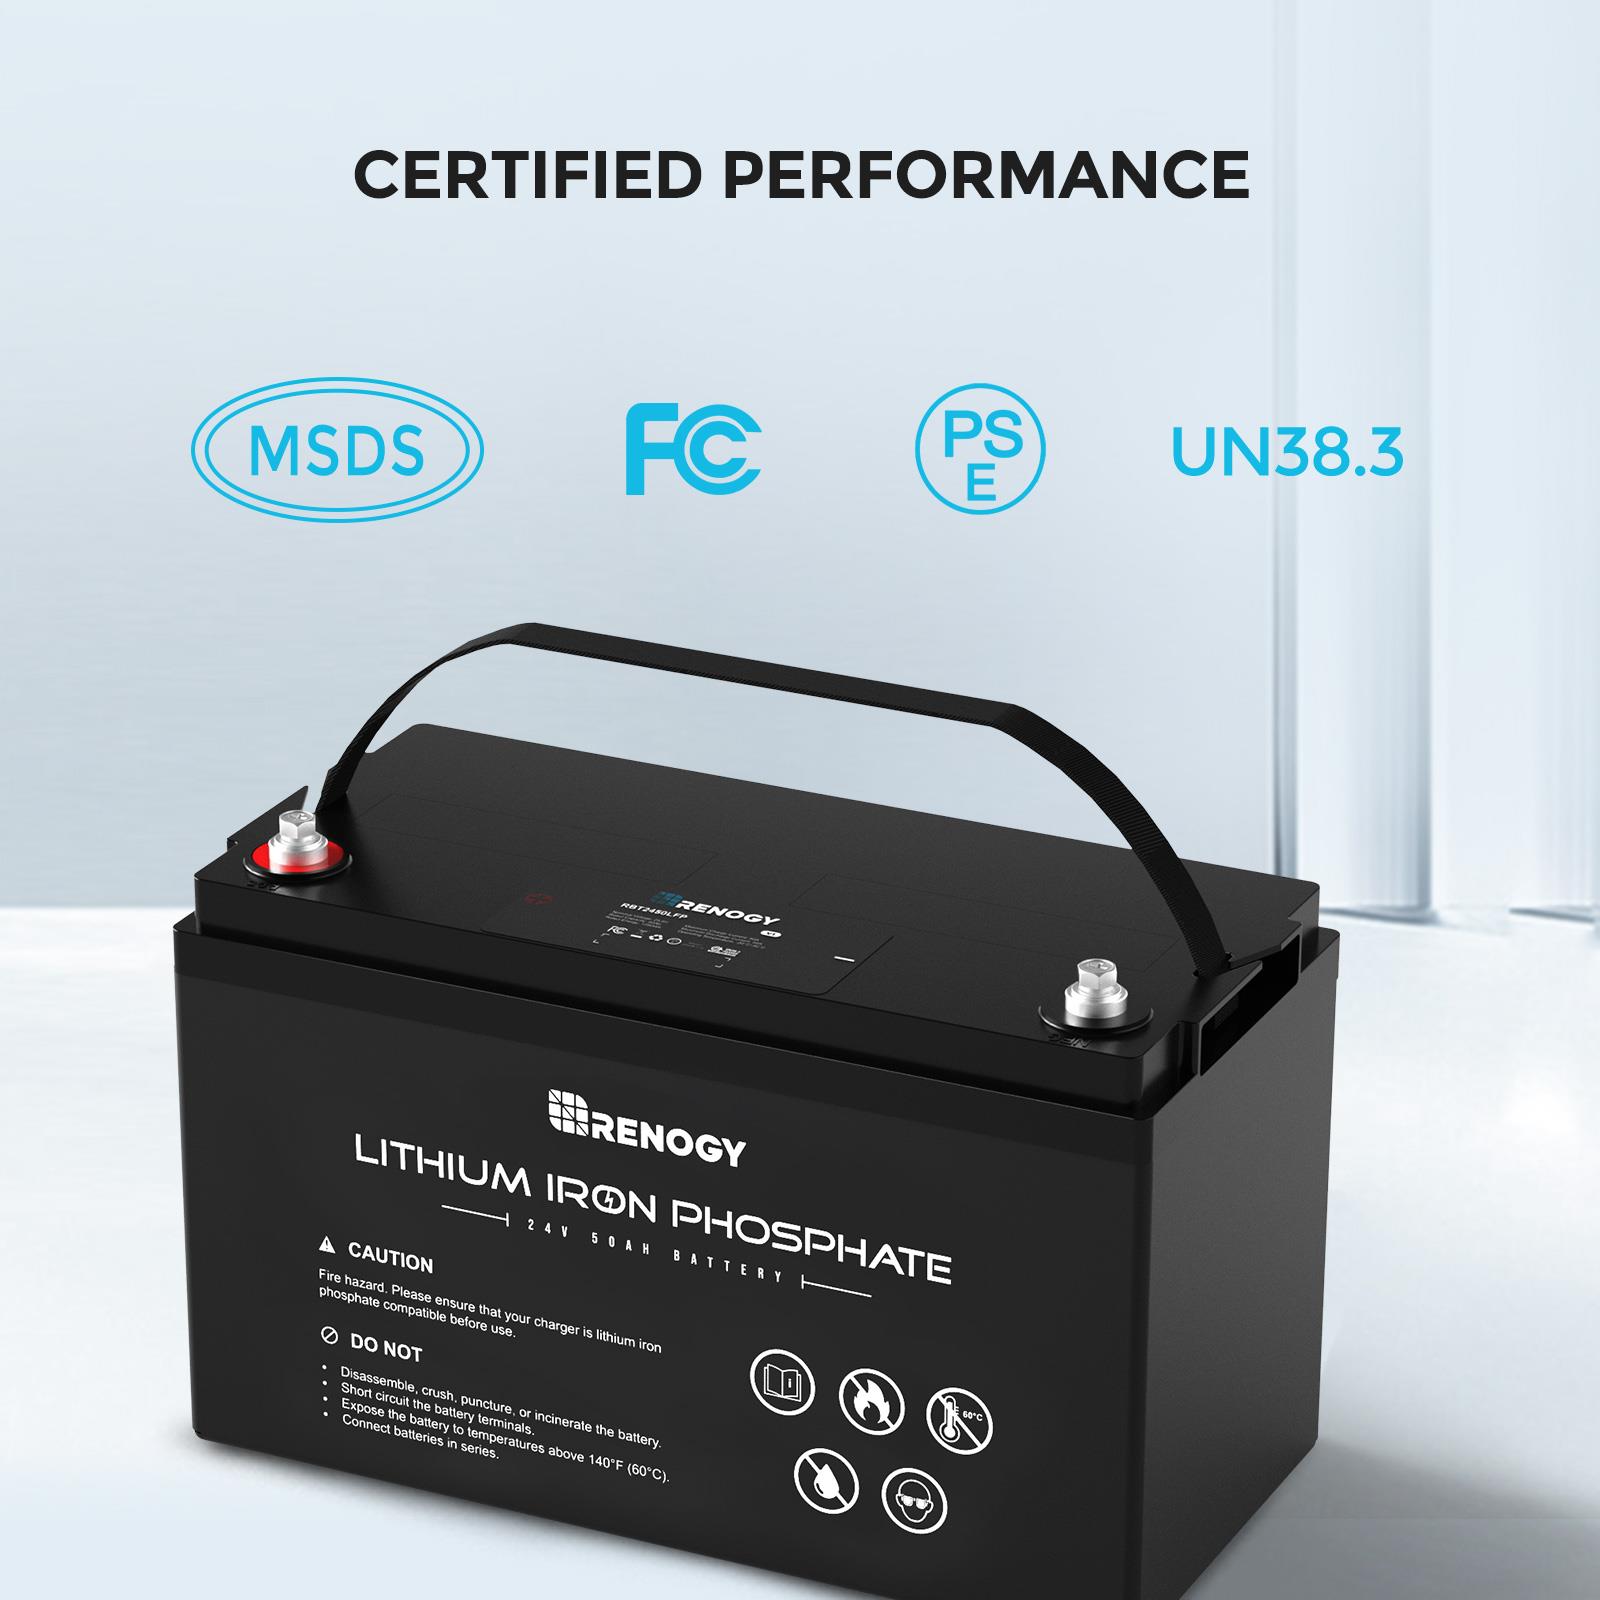 How to Charge a Lithium Battery? - Renogy United States